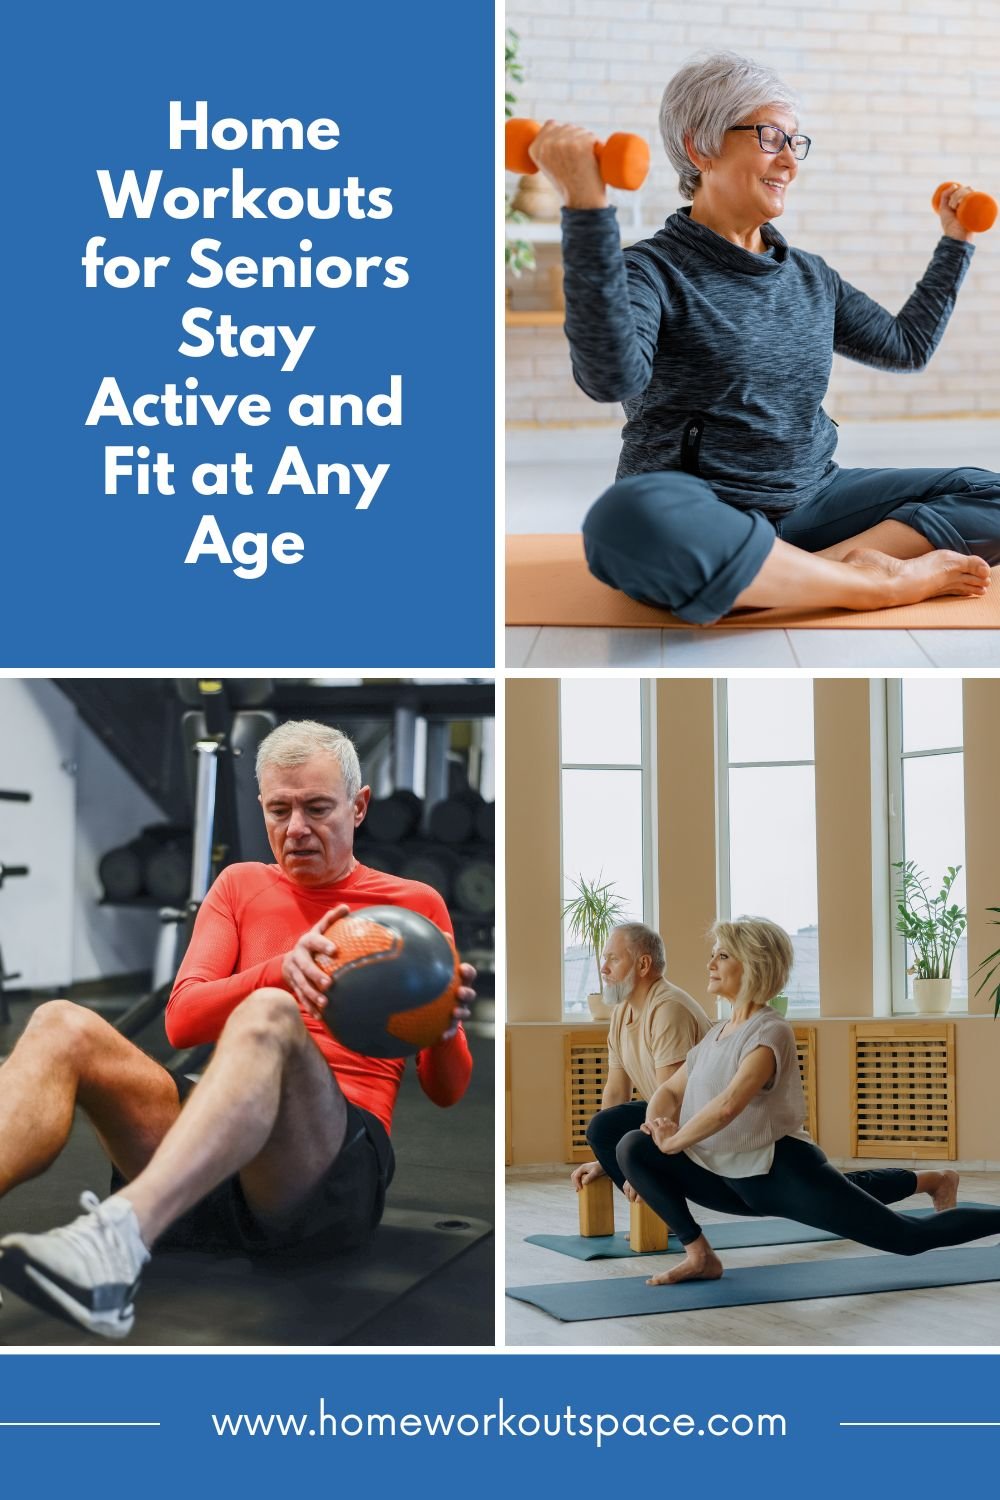 Home Workouts for Seniors Stay Active and Fit at Any Age